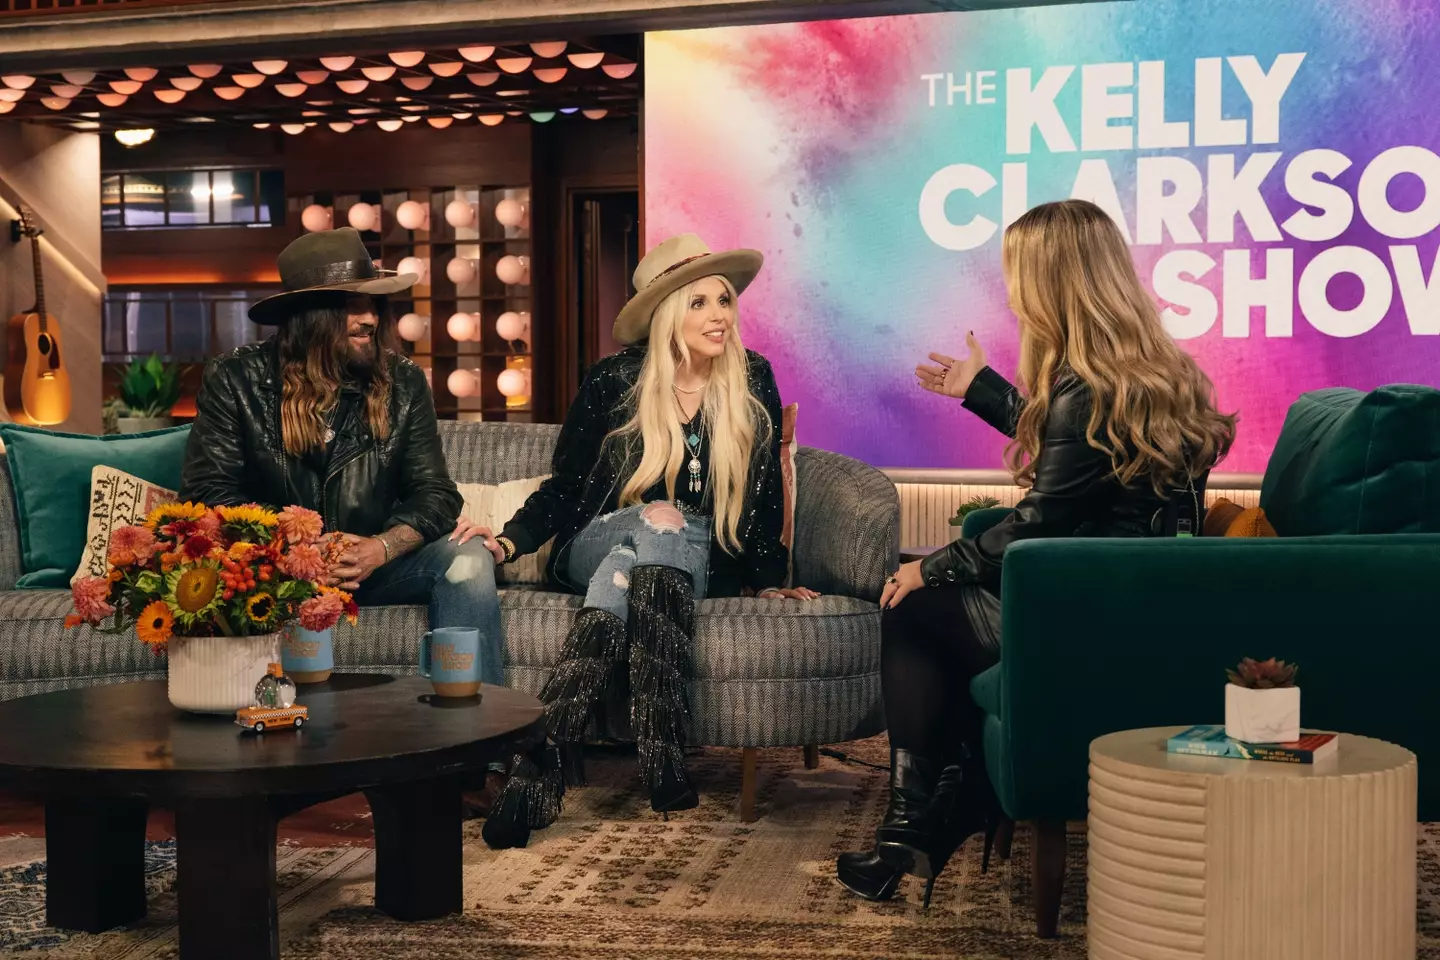 The pair appear on The Kelly Clarkson Show. (Weiss Eubanks/NBCUniversal via Getty Images)